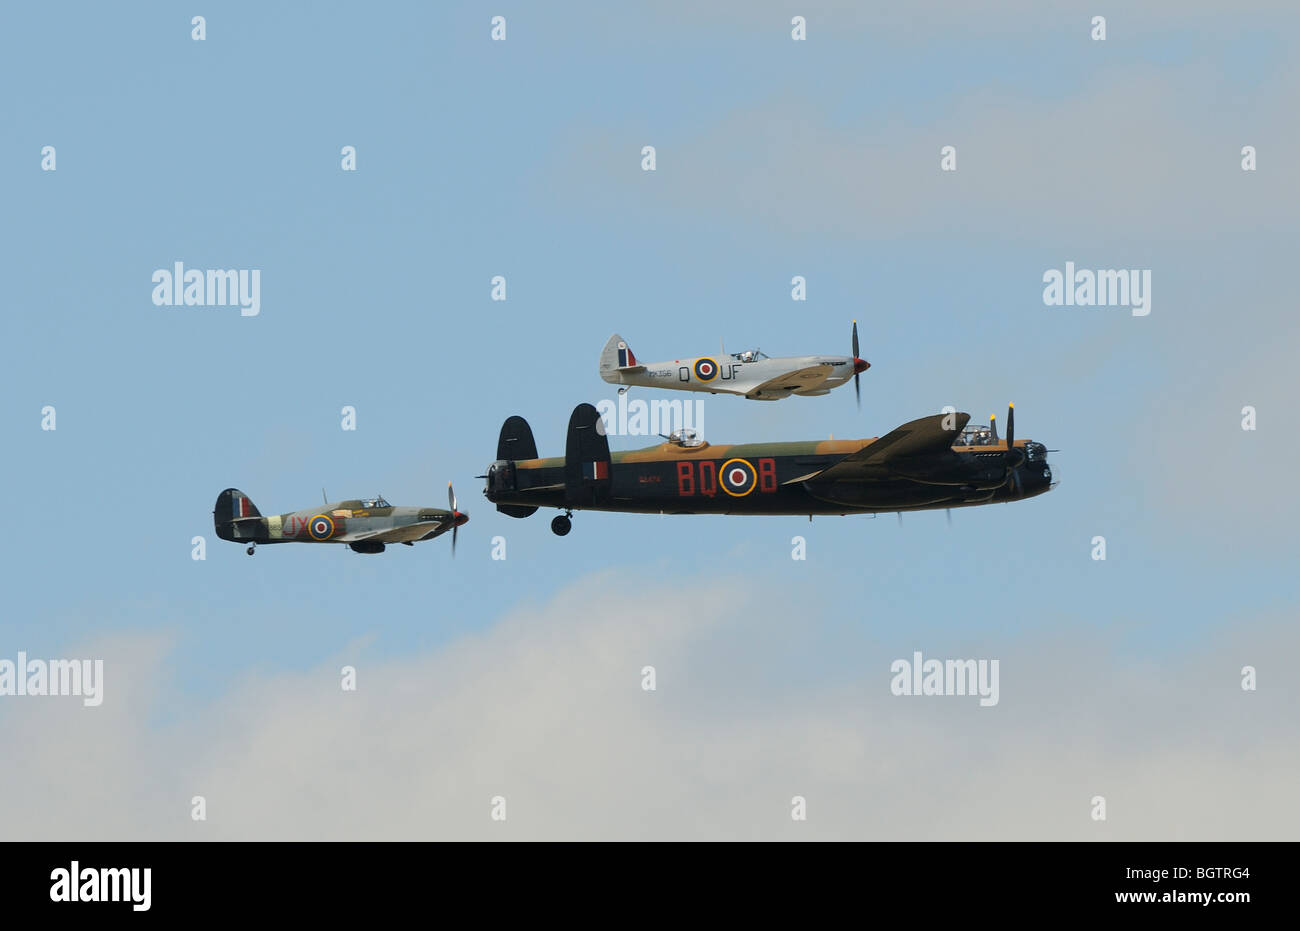 Battle of Britain memorial flight, Lancaster Spitfire and Hurricane aircraft in formation over Oxfordshire, UK. Stock Photo